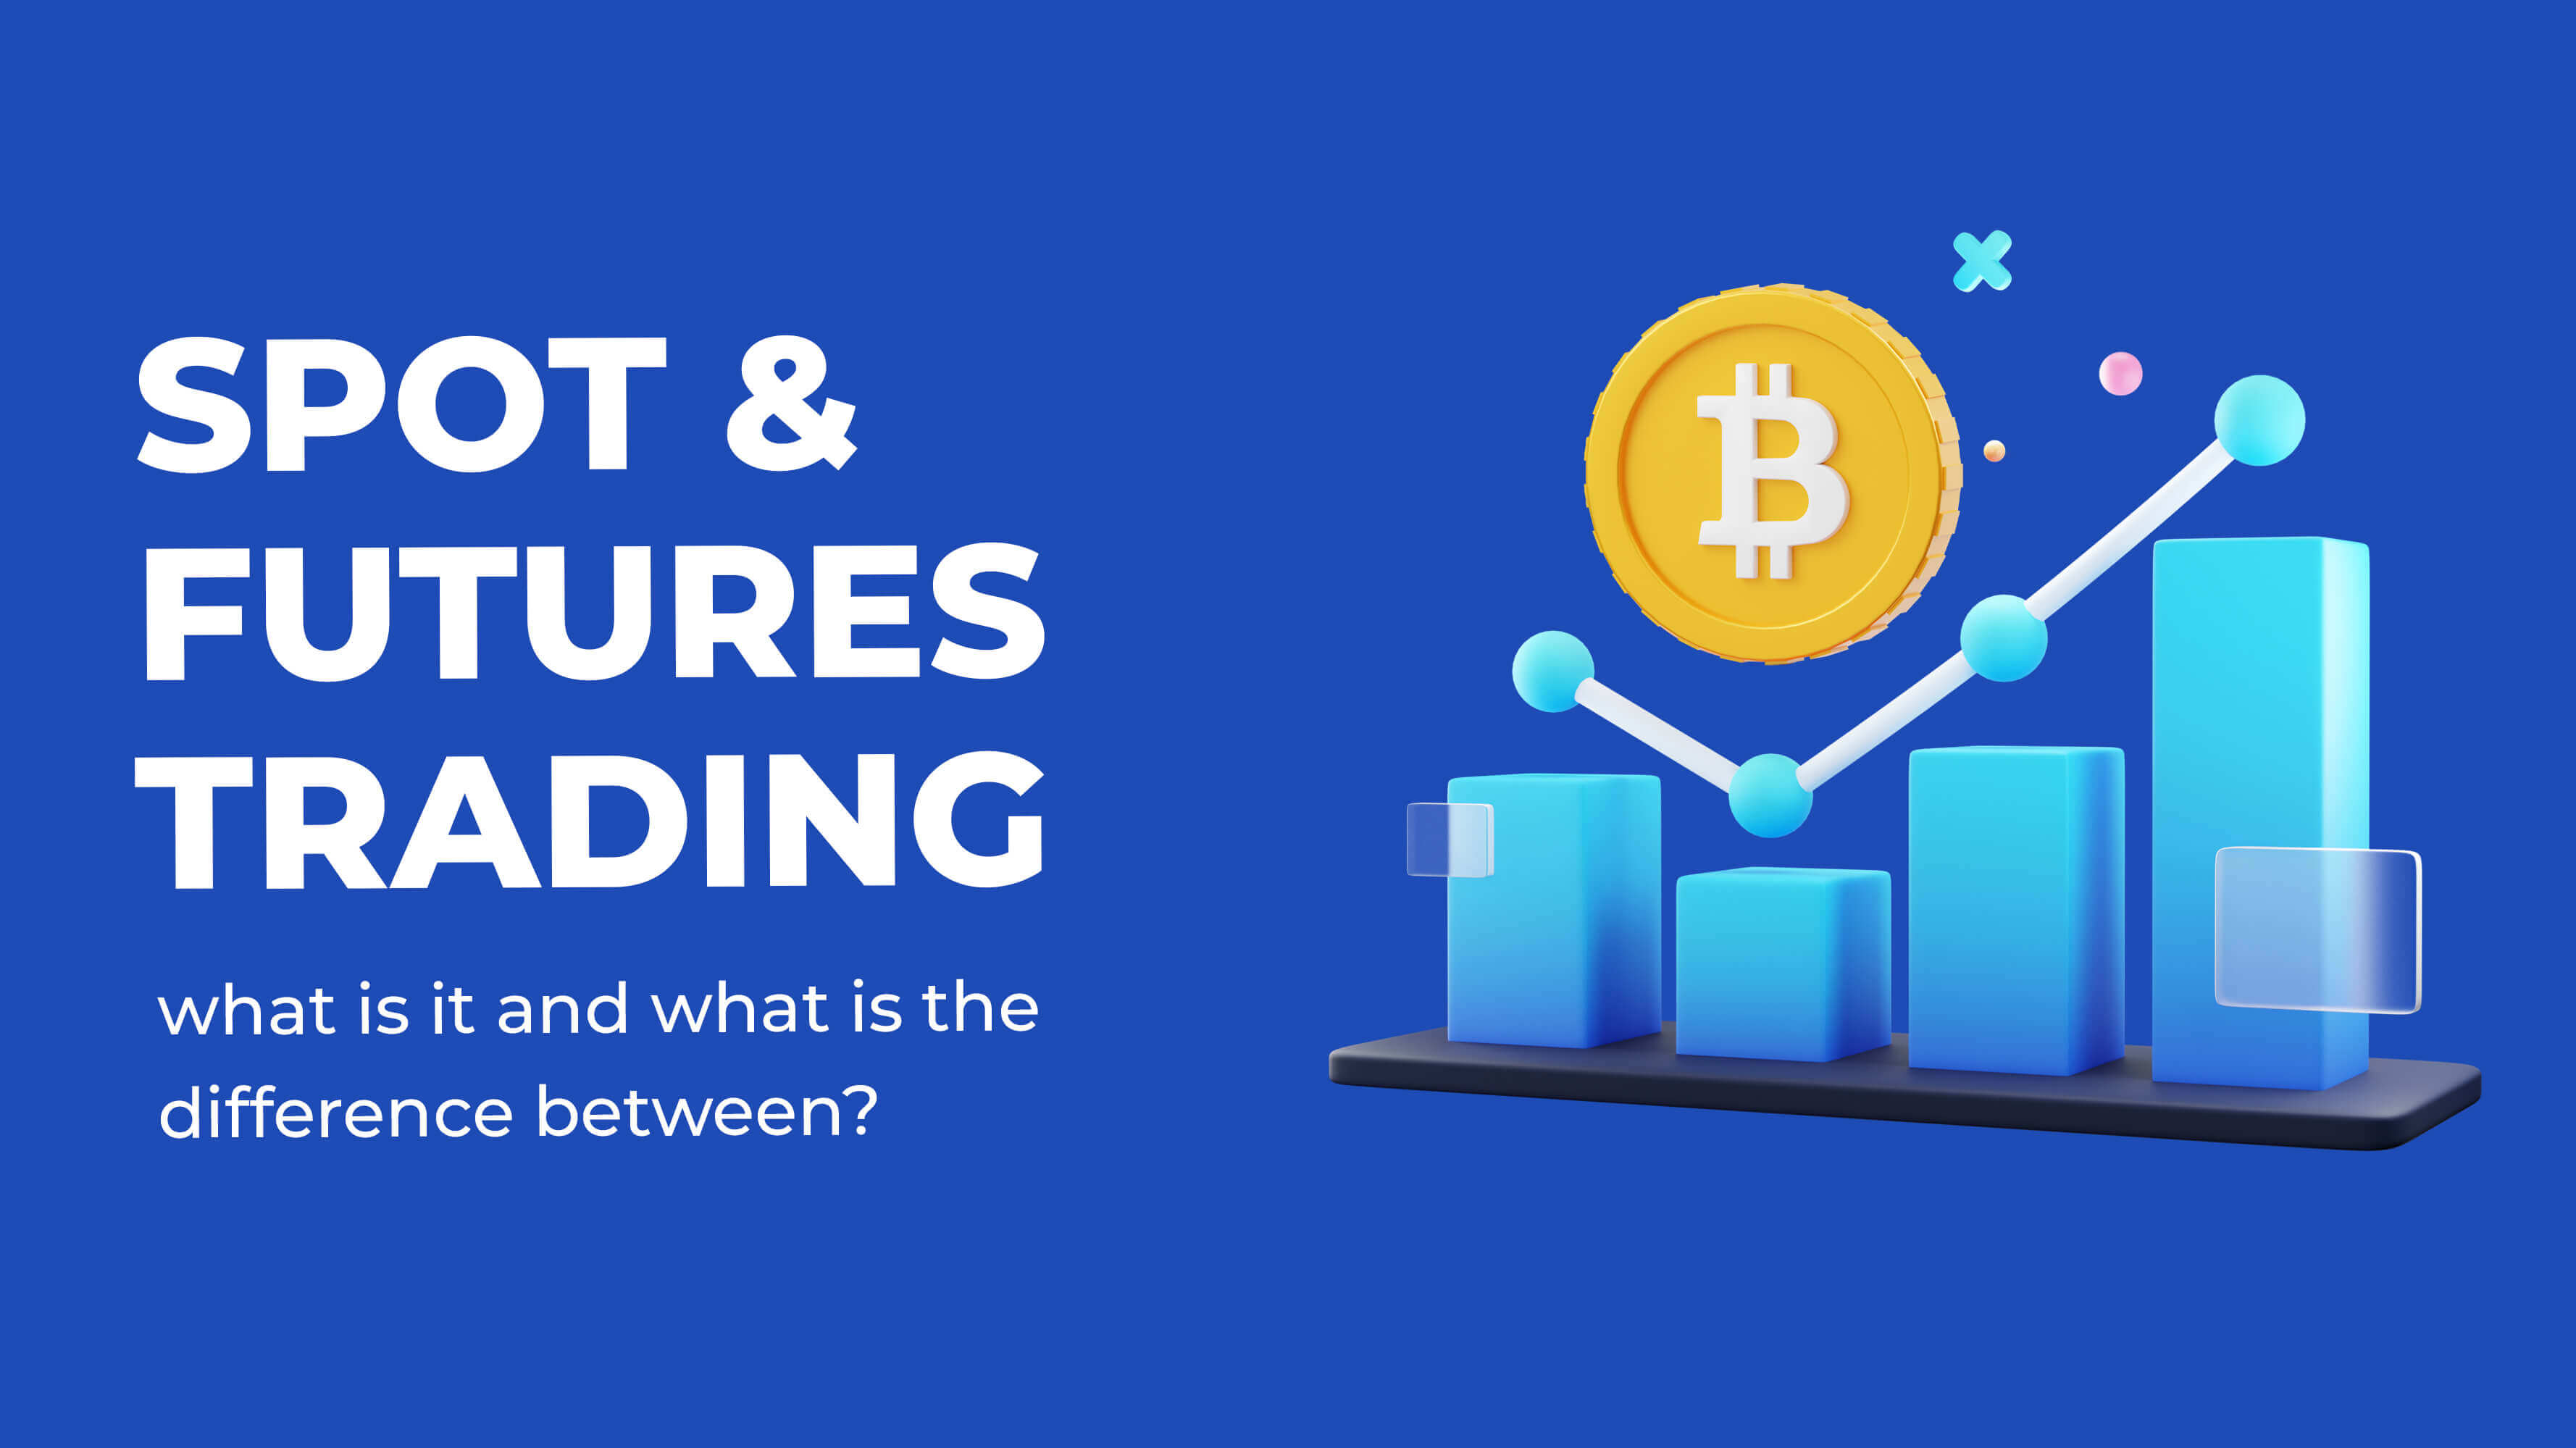 Spot and Futures trading, what is it and what is the difference between them?